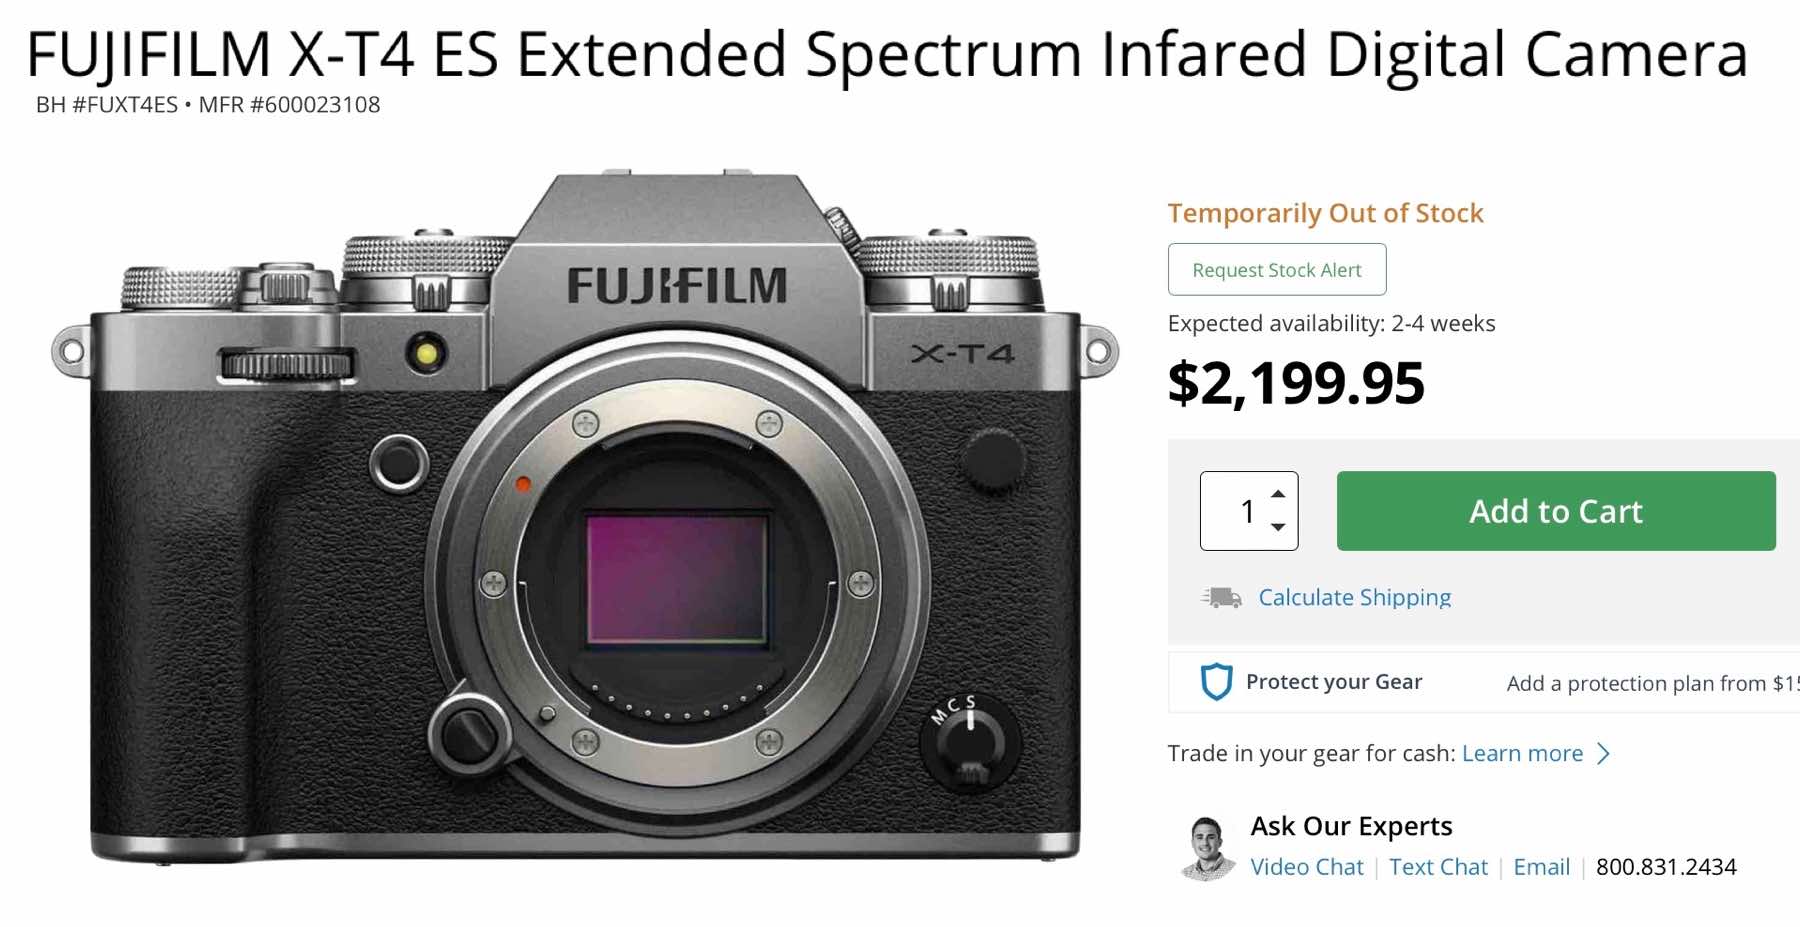 Fujifilm X-T4 ES Extended Spectrum Infrared Camera Available Now